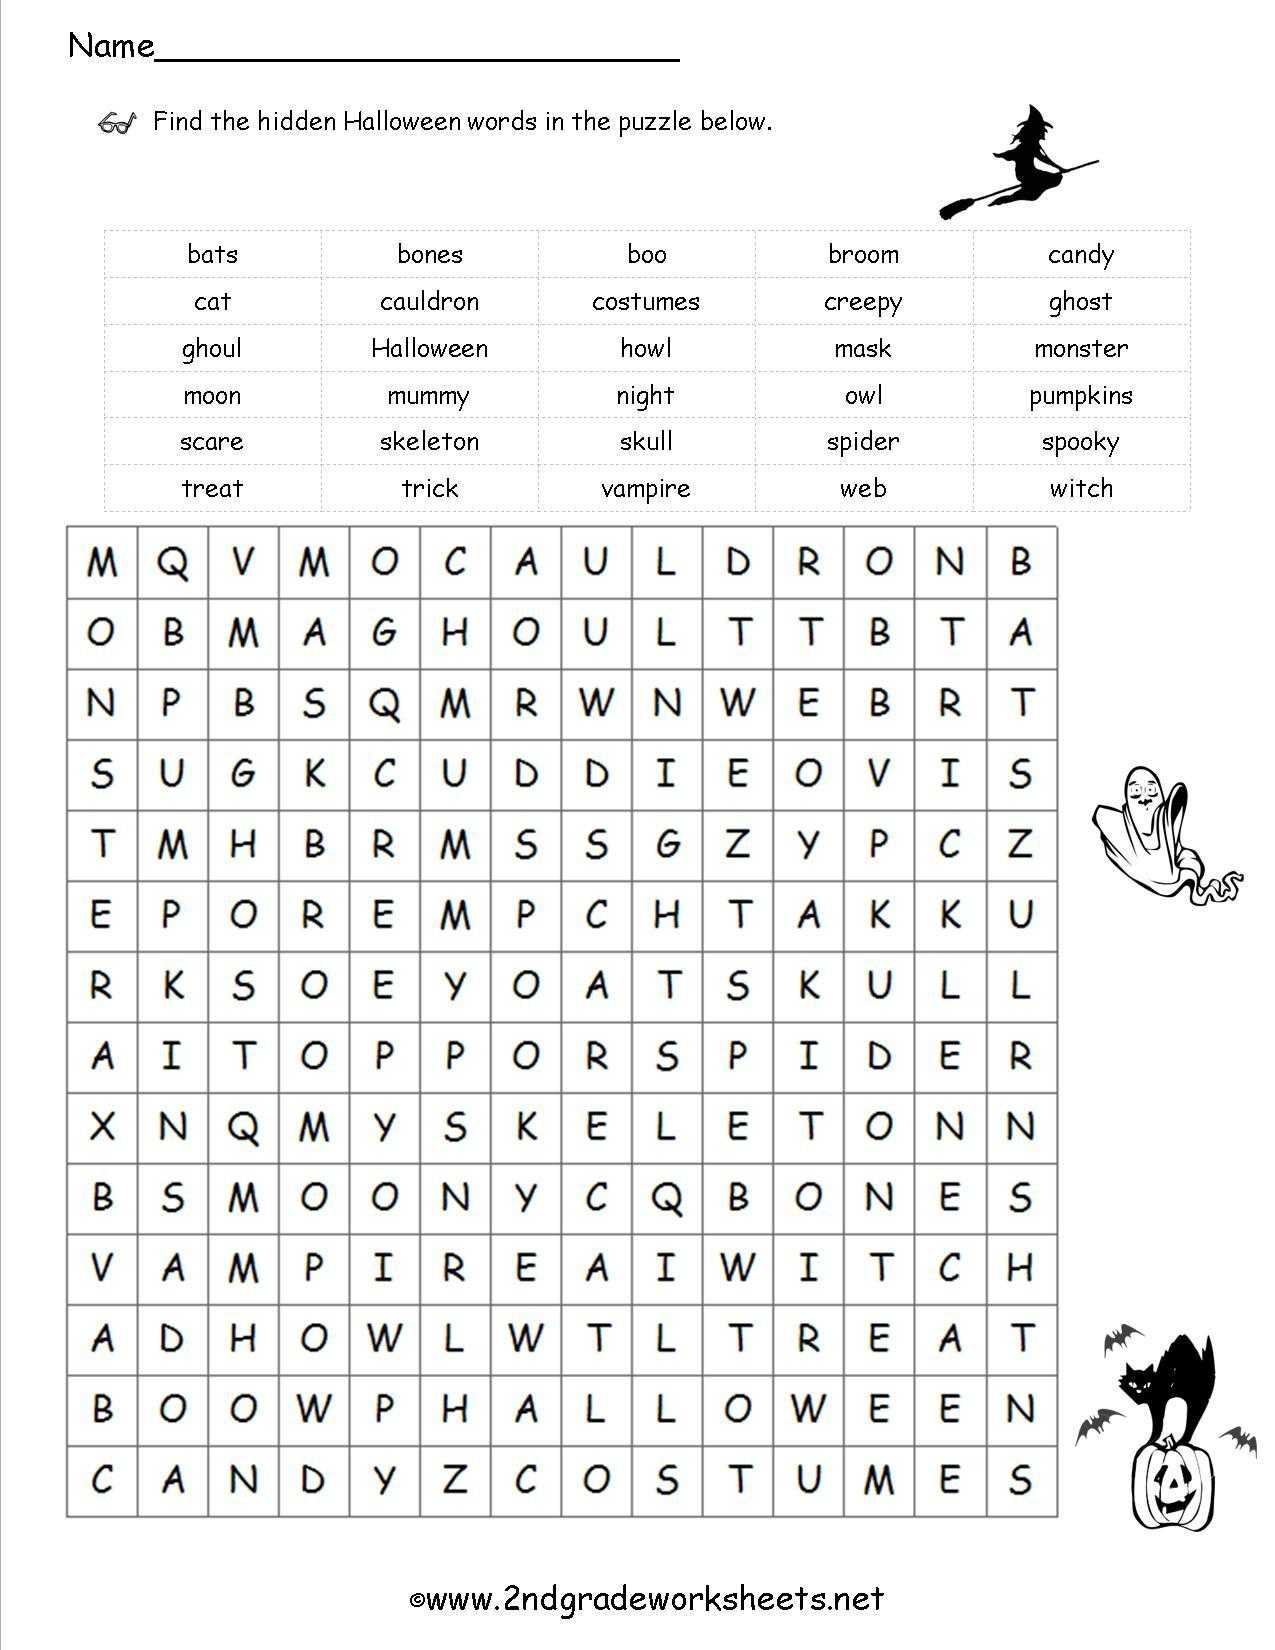 Seventh Grade English Worksheets together with Fun Reading Worksheets for 7th Grade